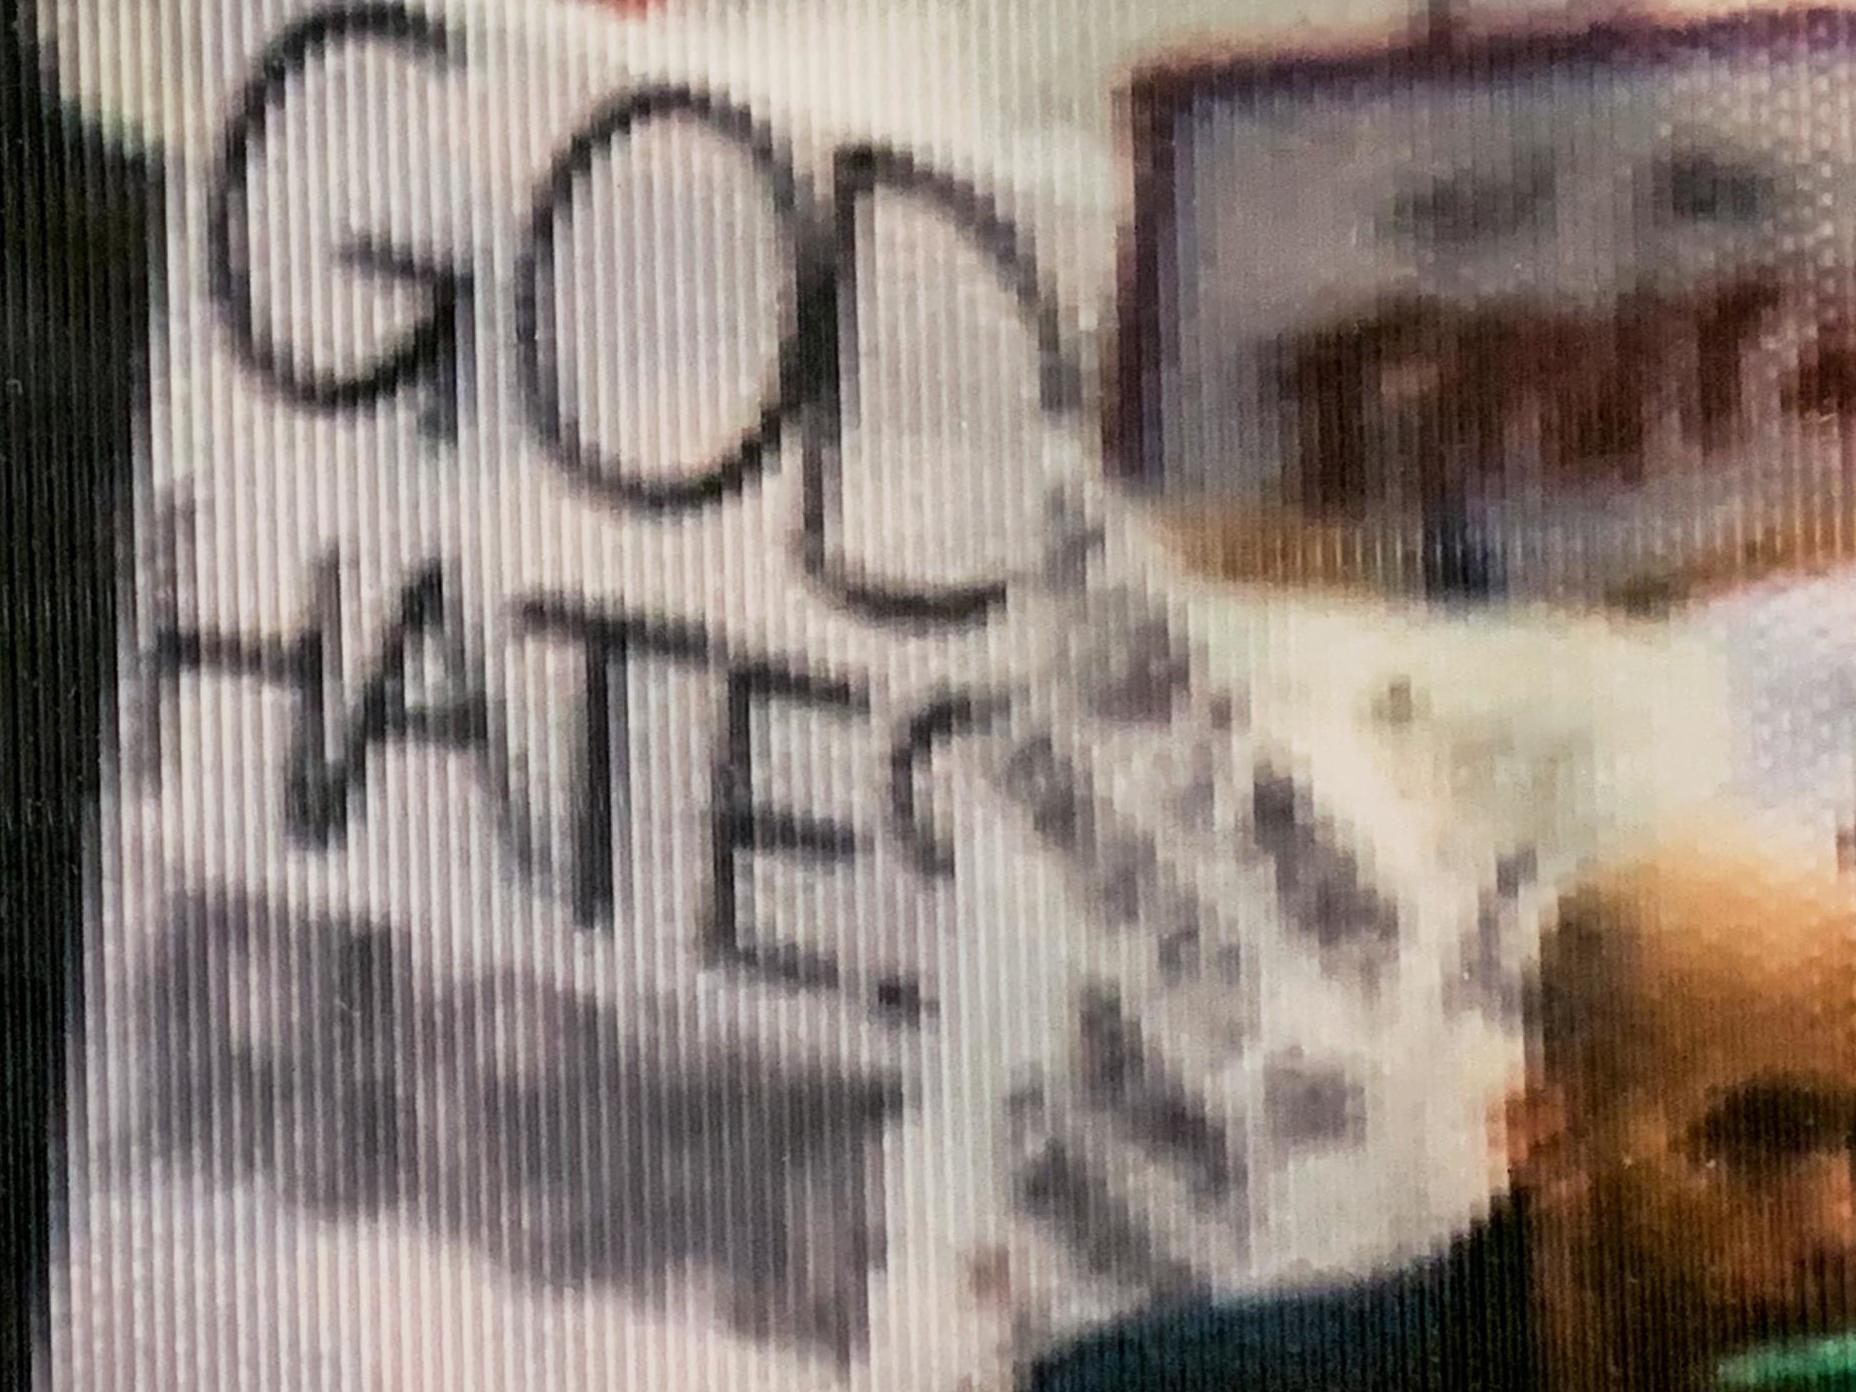 This is a close-up of an altered sign in a photograph from the Women's March in 2017 that is on display at the National Archives in Washington DC Salwan Geroges